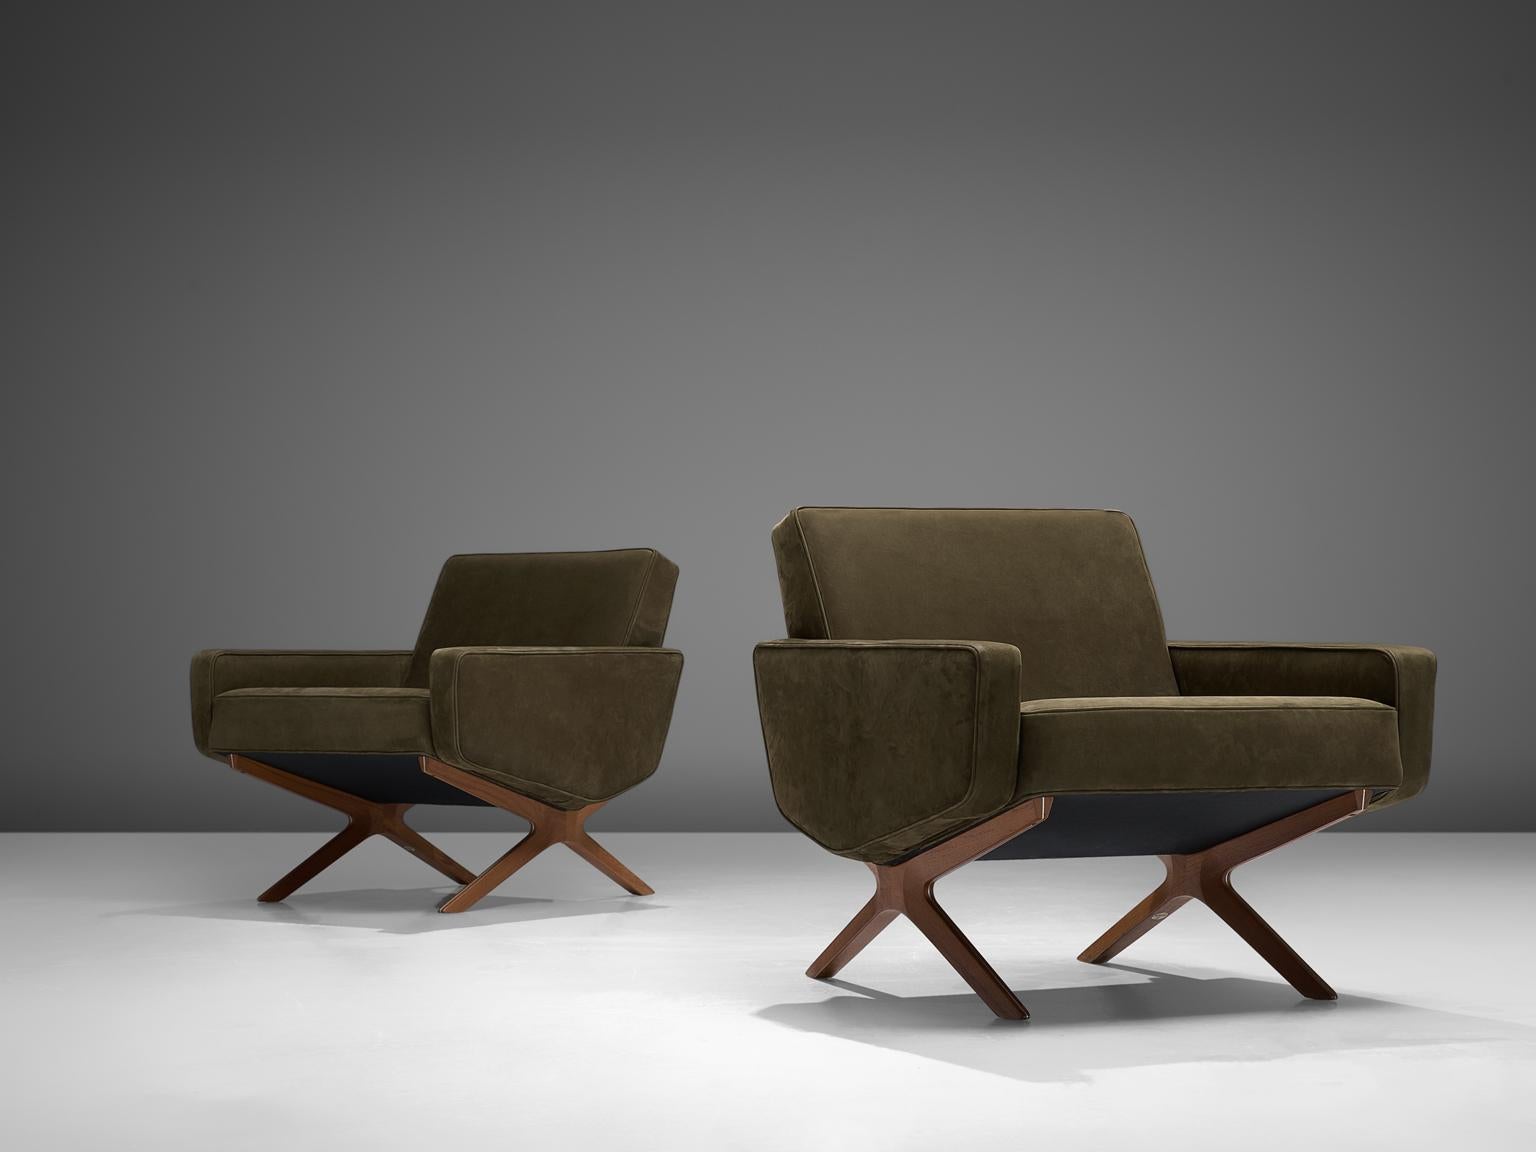 Peter Hvidt & Orla Mølgaard Nielsen, Silverline set of 2 lounge chairs, leather, teak and metal, 1950s.

Comfortable lounge chairs with an architectural design by Hvidt & Mølgaard. This model is called silverline, due to its aesthetic metal line in